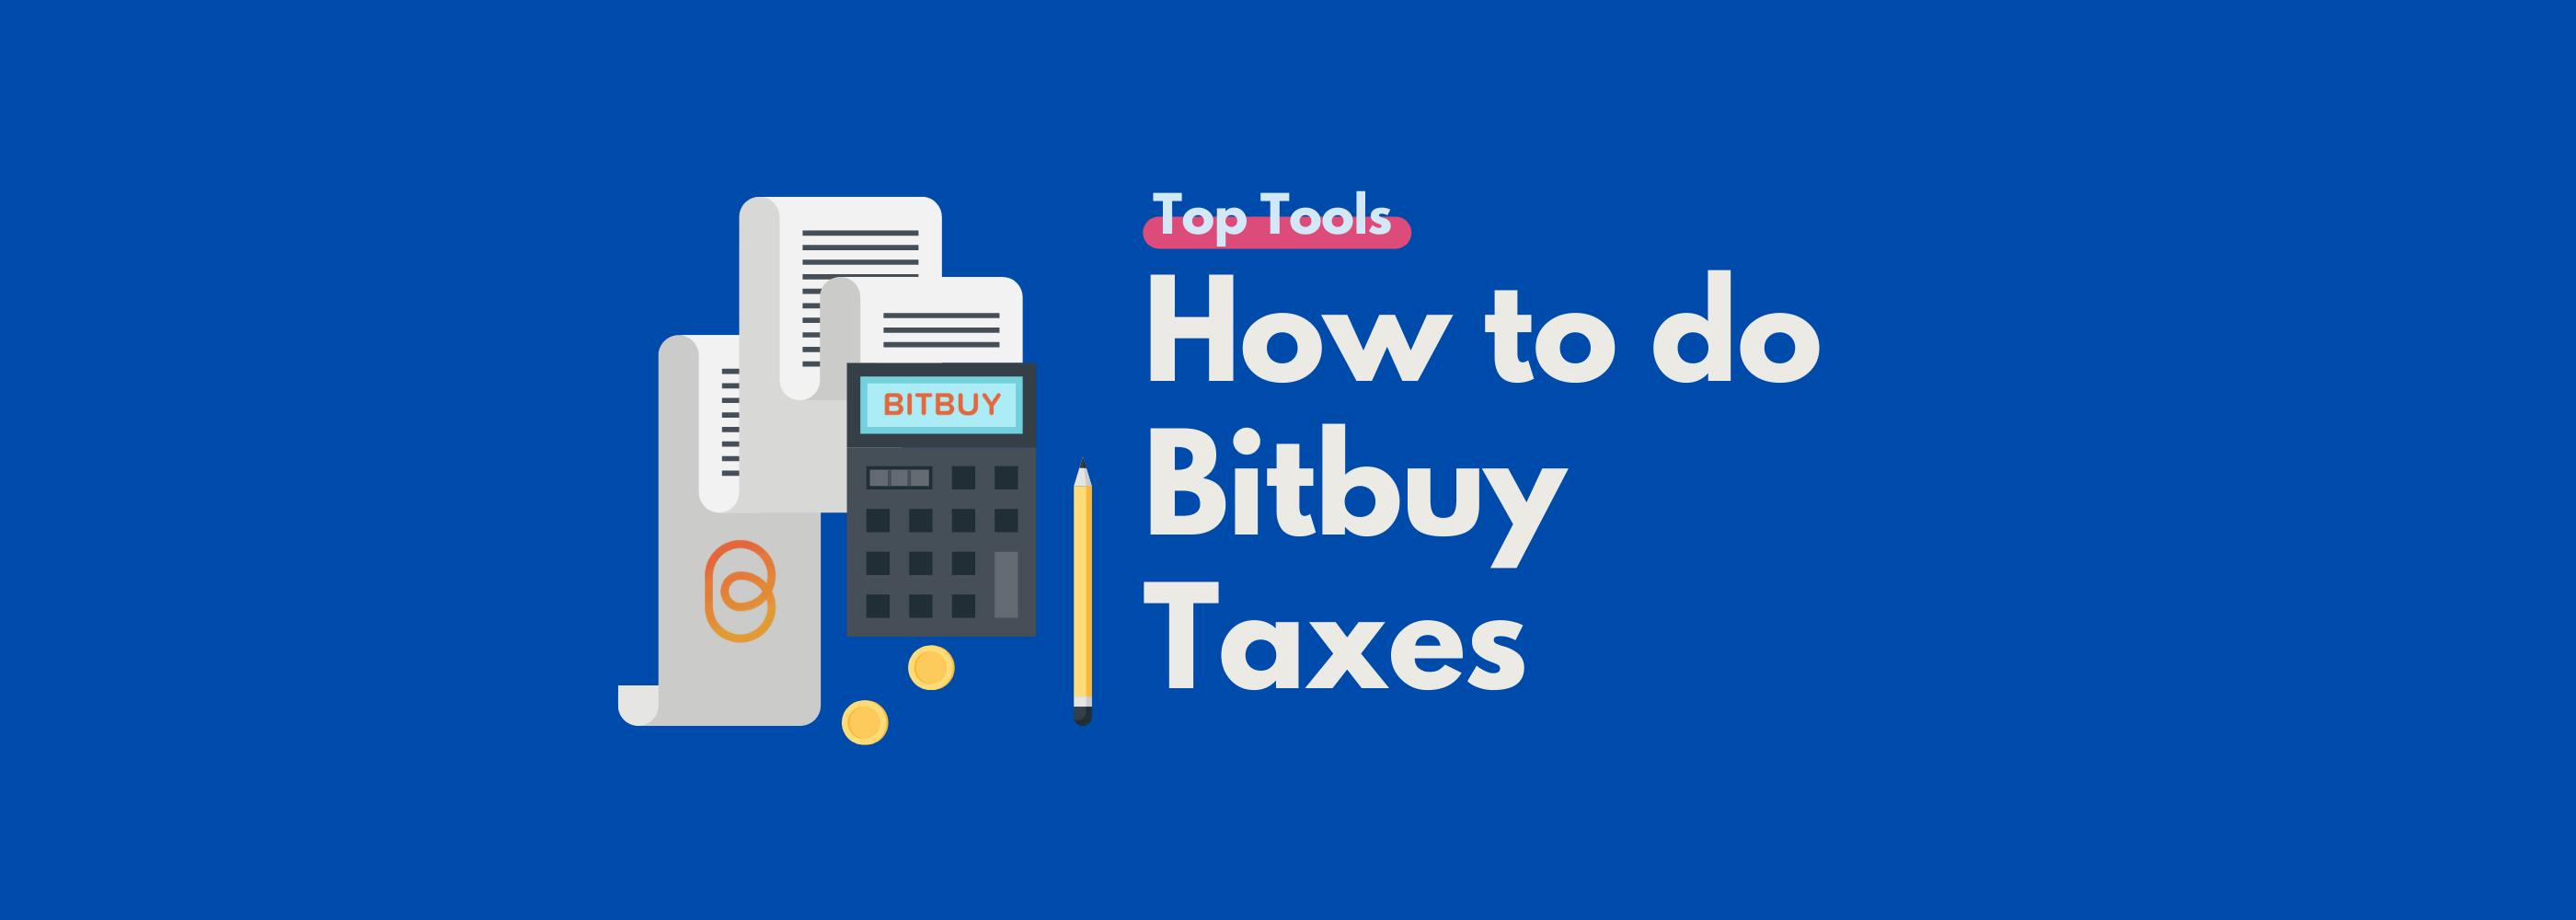 how to report bitocin on taxes